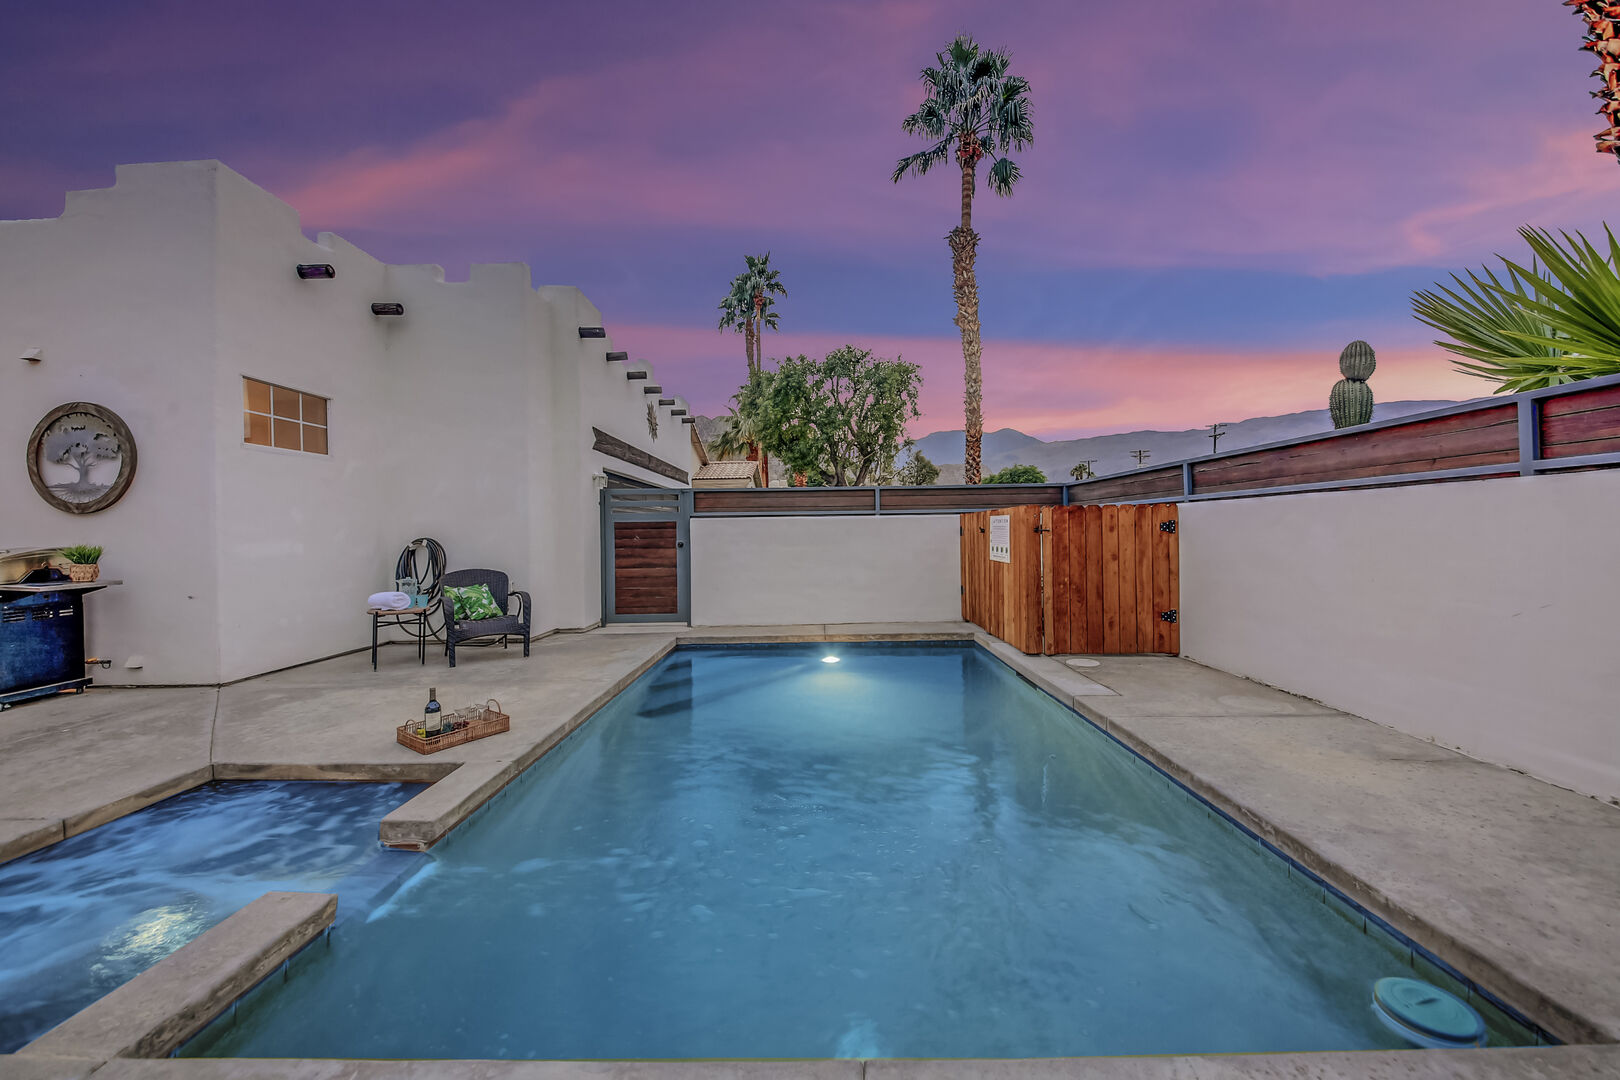 Hacienda is in one of the very best locations, just around the corner from Old Town La Quinta.